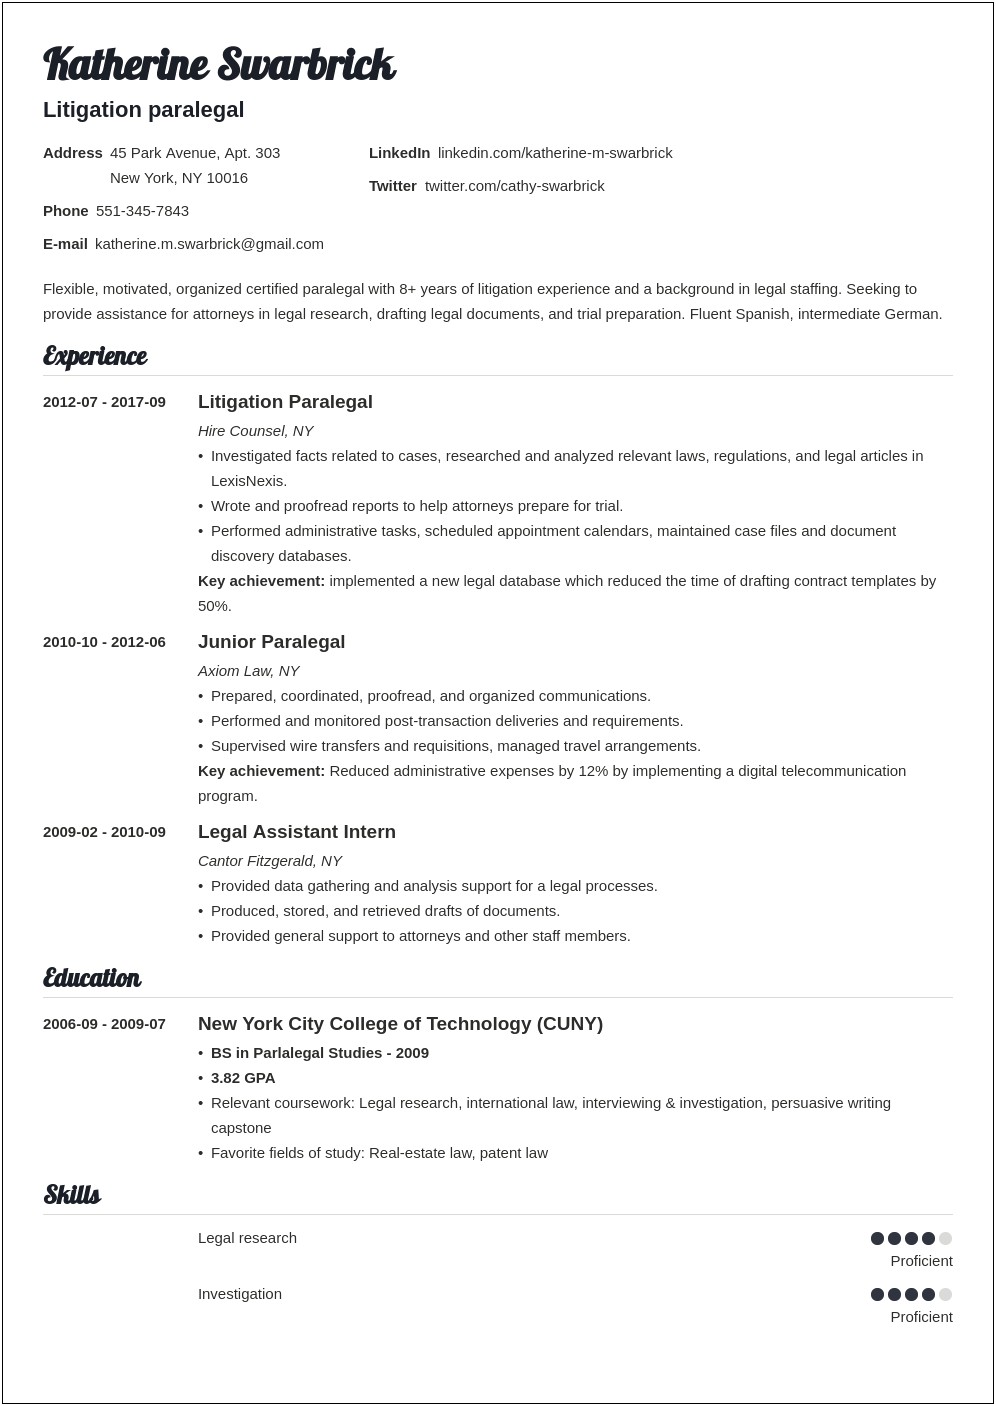 Work Experience For Legal Secretary On Resume Examples